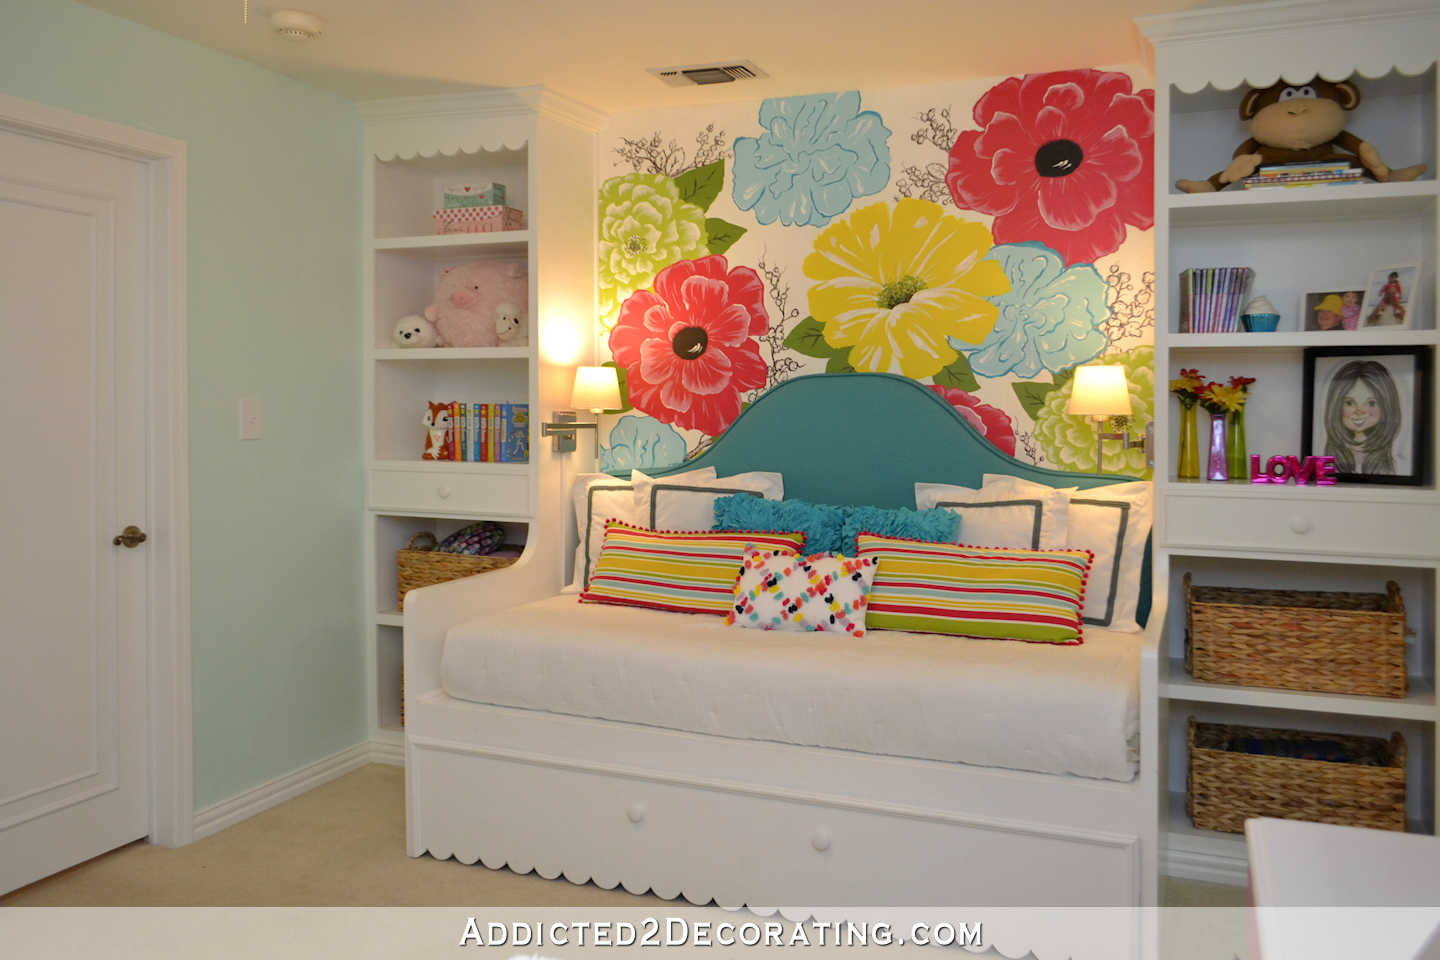 Yaleana's Bedroom - after 1 - built-in day bed flanked with built-in bookcases and large flower painted wall mural